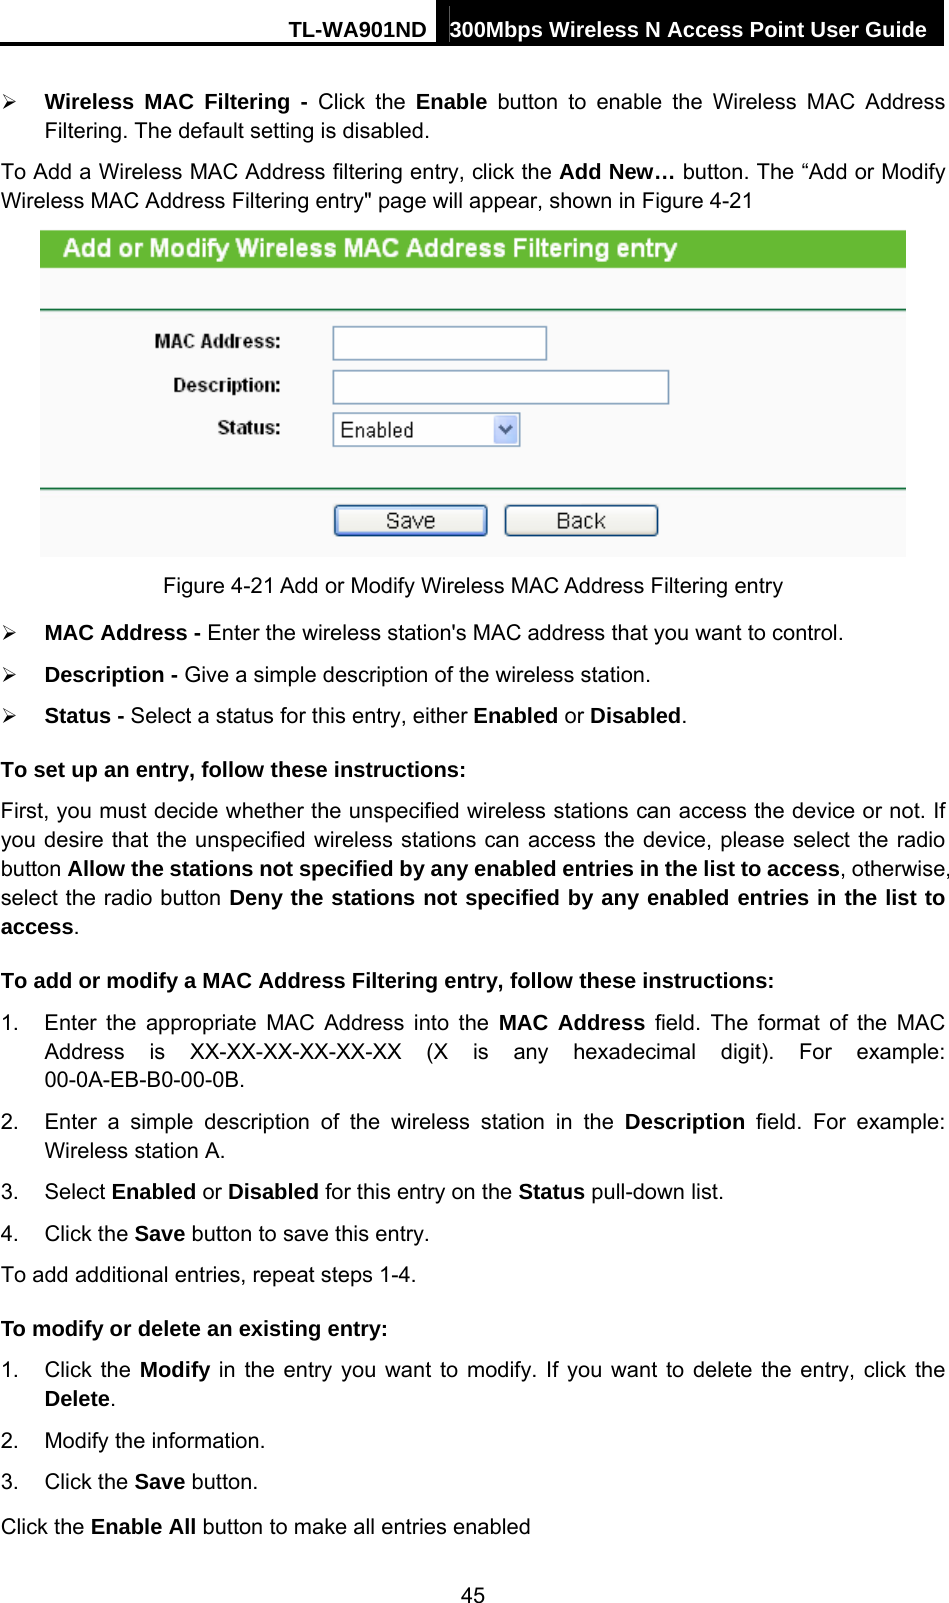 TL-WA901ND 300Mbps Wireless N Access Point User Guide ¾ Wireless MAC Filtering - Click the Enable button to enable the Wireless MAC Address Filtering. The default setting is disabled. To Add a Wireless MAC Address filtering entry, click the Add New… button. The “Add or Modify Wireless MAC Address Filtering entry&quot; page will appear, shown in Figure 4-21  Figure 4-21 Add or Modify Wireless MAC Address Filtering entry ¾ MAC Address - Enter the wireless station&apos;s MAC address that you want to control.   ¾ Description - Give a simple description of the wireless station.   ¾ Status - Select a status for this entry, either Enabled or Disabled. To set up an entry, follow these instructions:   First, you must decide whether the unspecified wireless stations can access the device or not. If you desire that the unspecified wireless stations can access the device, please select the radio button Allow the stations not specified by any enabled entries in the list to access, otherwise, select the radio button Deny the stations not specified by any enabled entries in the list to access. To add or modify a MAC Address Filtering entry, follow these instructions: 1.  Enter the appropriate MAC Address into the MAC Address field. The format of the MAC Address is XX-XX-XX-XX-XX-XX (X is any hexadecimal digit). For example: 00-0A-EB-B0-00-0B.  2.  Enter a simple description of the wireless station in the Description field. For example: Wireless station A. 3. Select Enabled or Disabled for this entry on the Status pull-down list. 4. Click the Save button to save this entry. To add additional entries, repeat steps 1-4. To modify or delete an existing entry: 1. Click the Modify in the entry you want to modify. If you want to delete the entry, click the Delete. 2.  Modify the information.   3. Click the Save button. Click the Enable All button to make all entries enabled 45 